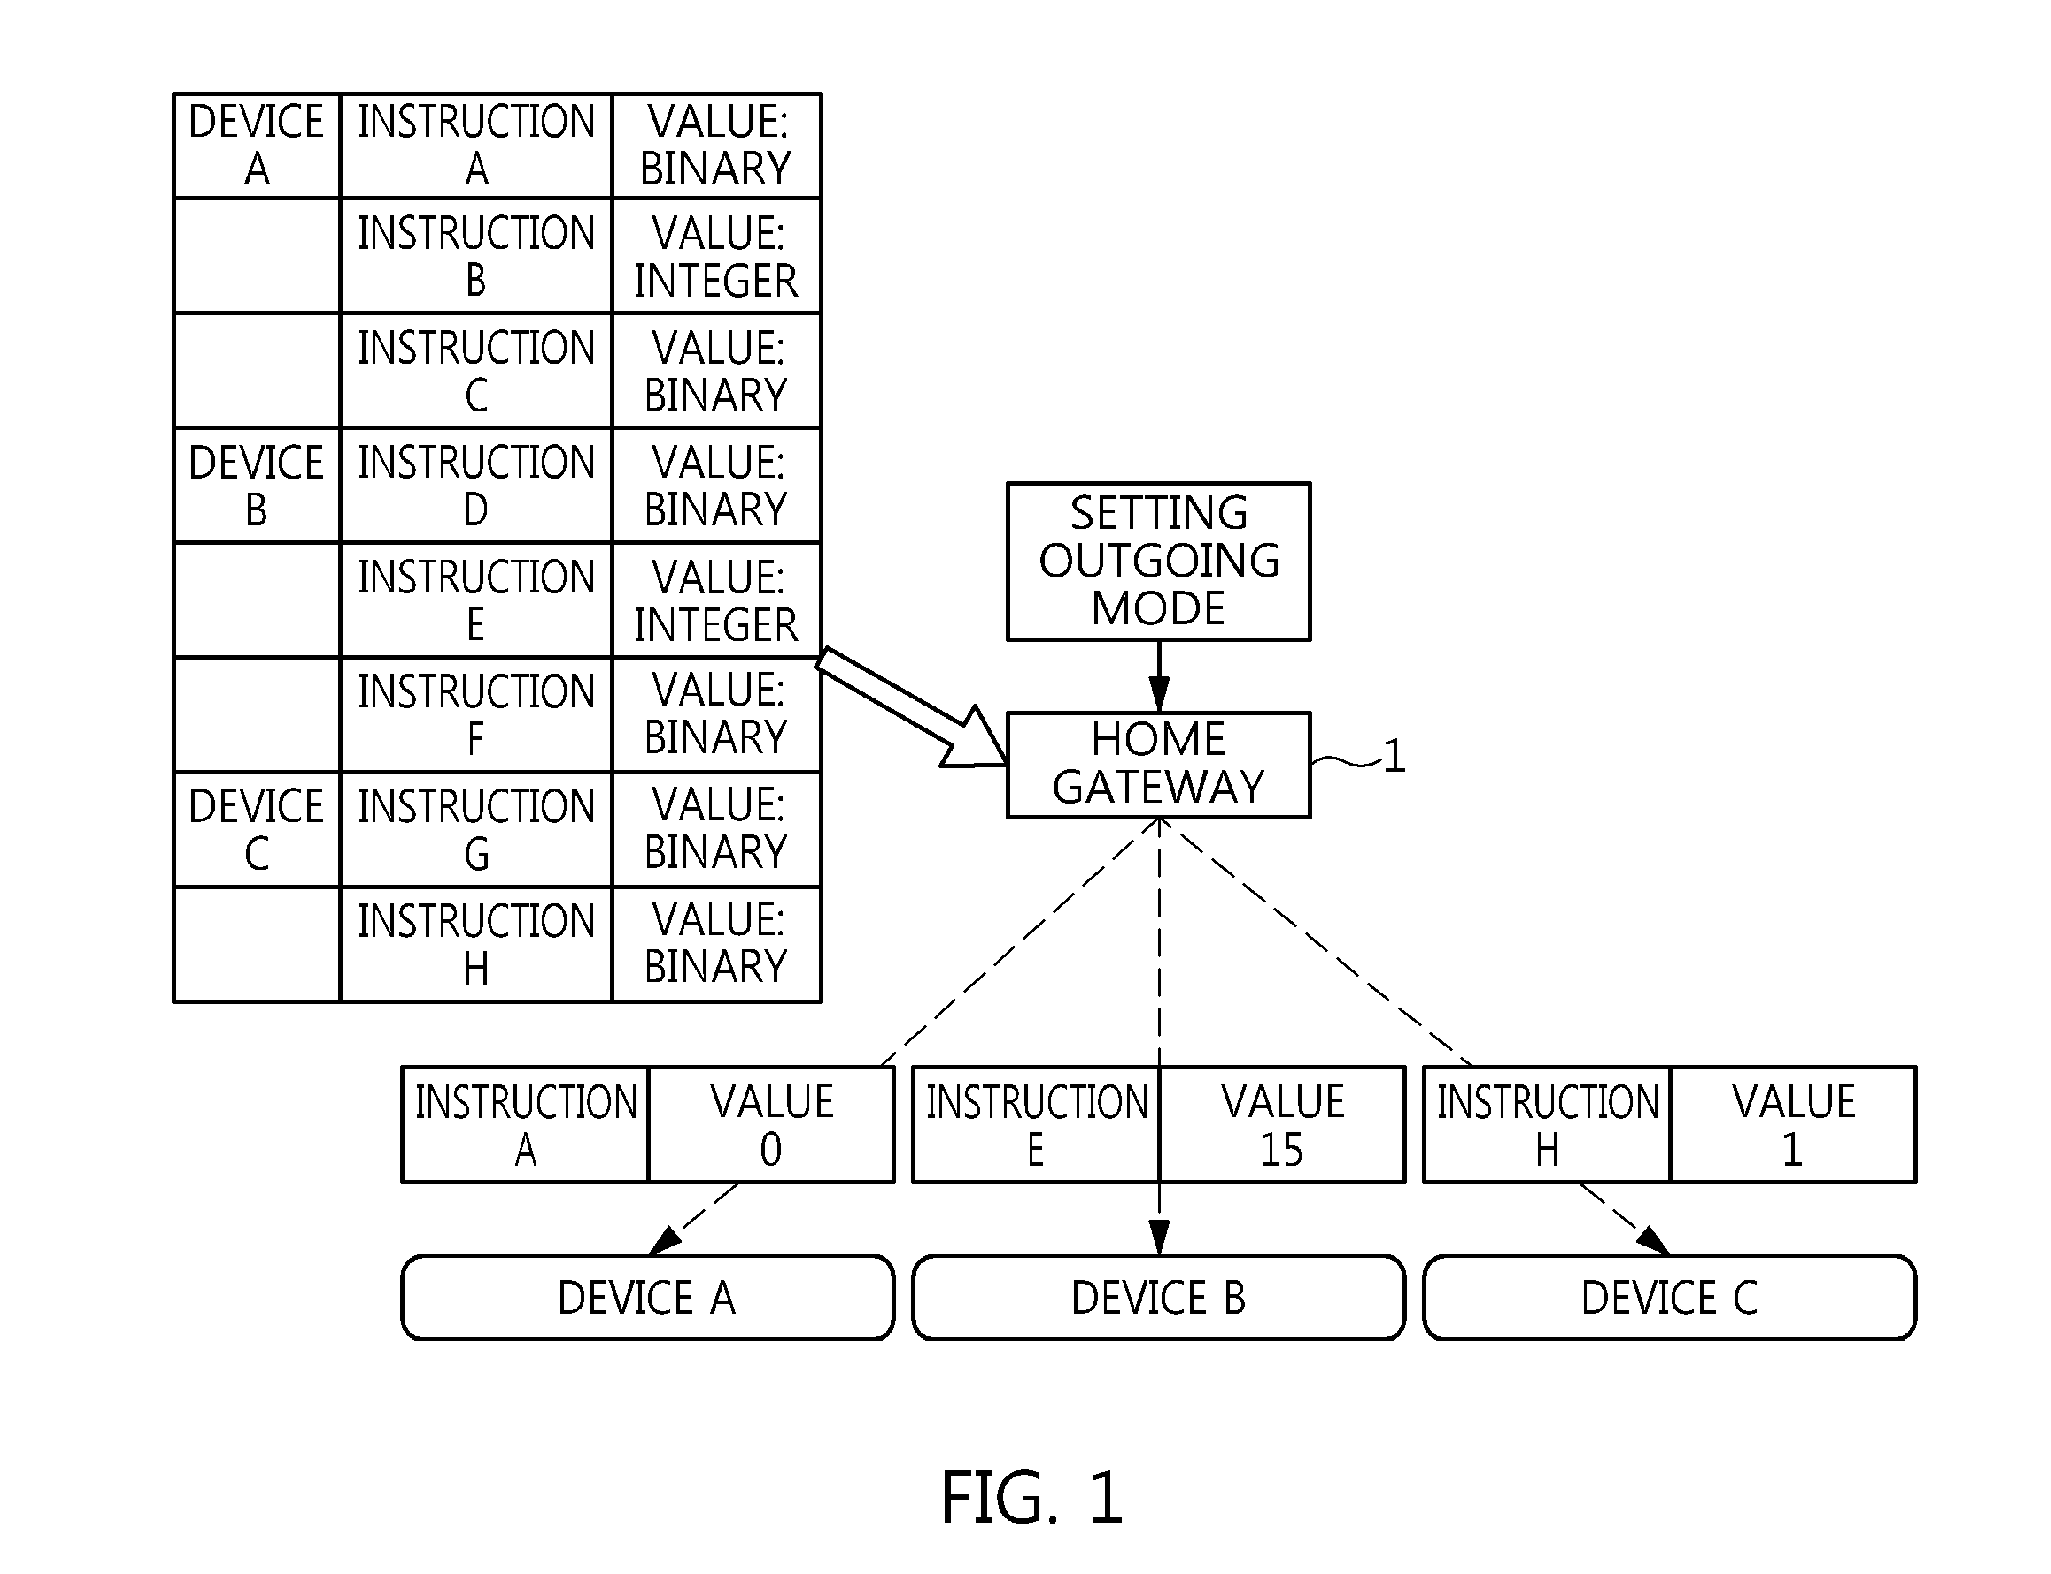 Apparatus and method for zero-configuration interworking between devices, and distributed home network system using the same